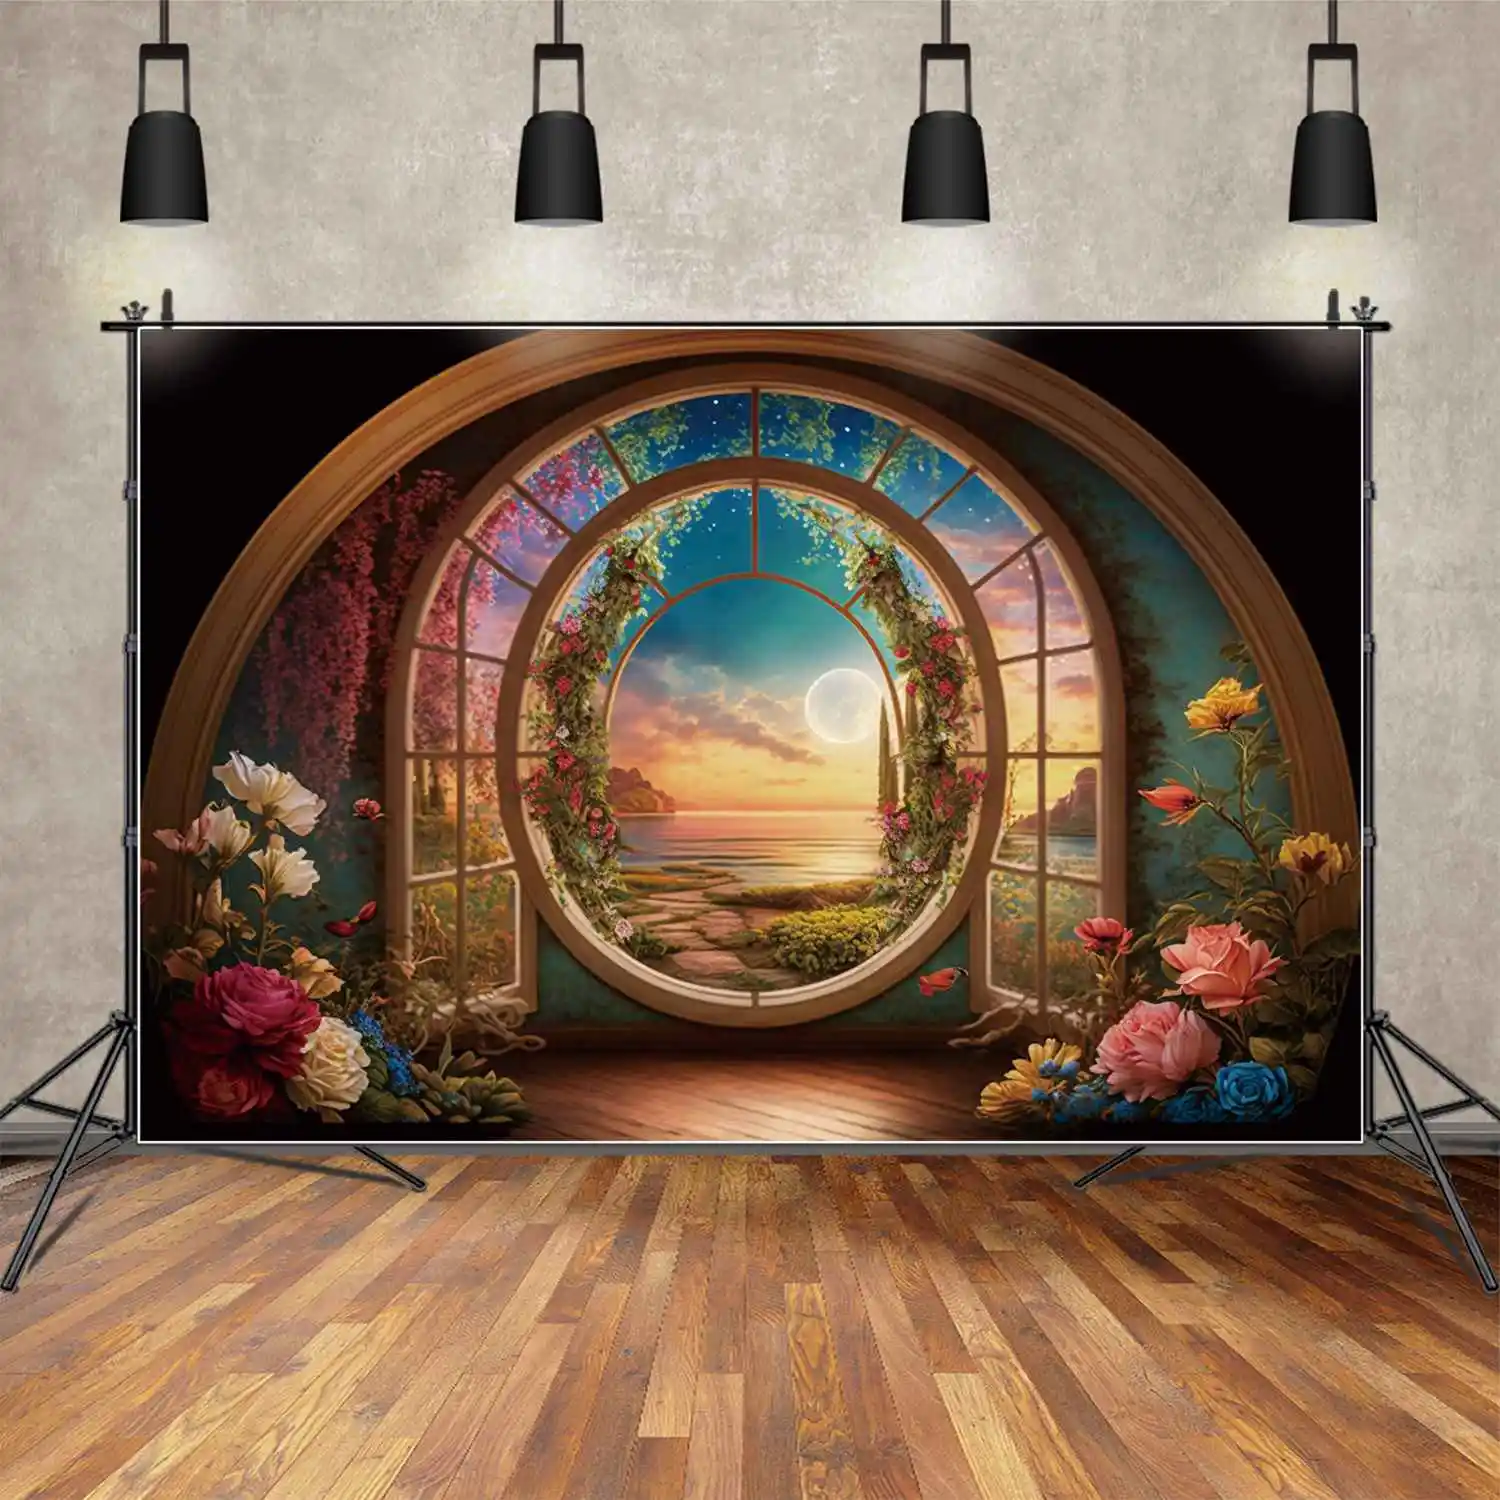 

MOON.QG Backdrop Beach Flower Room Circle Arch Door Decor Birthday Background Children Sunset Floral Party Wall Photo Booth